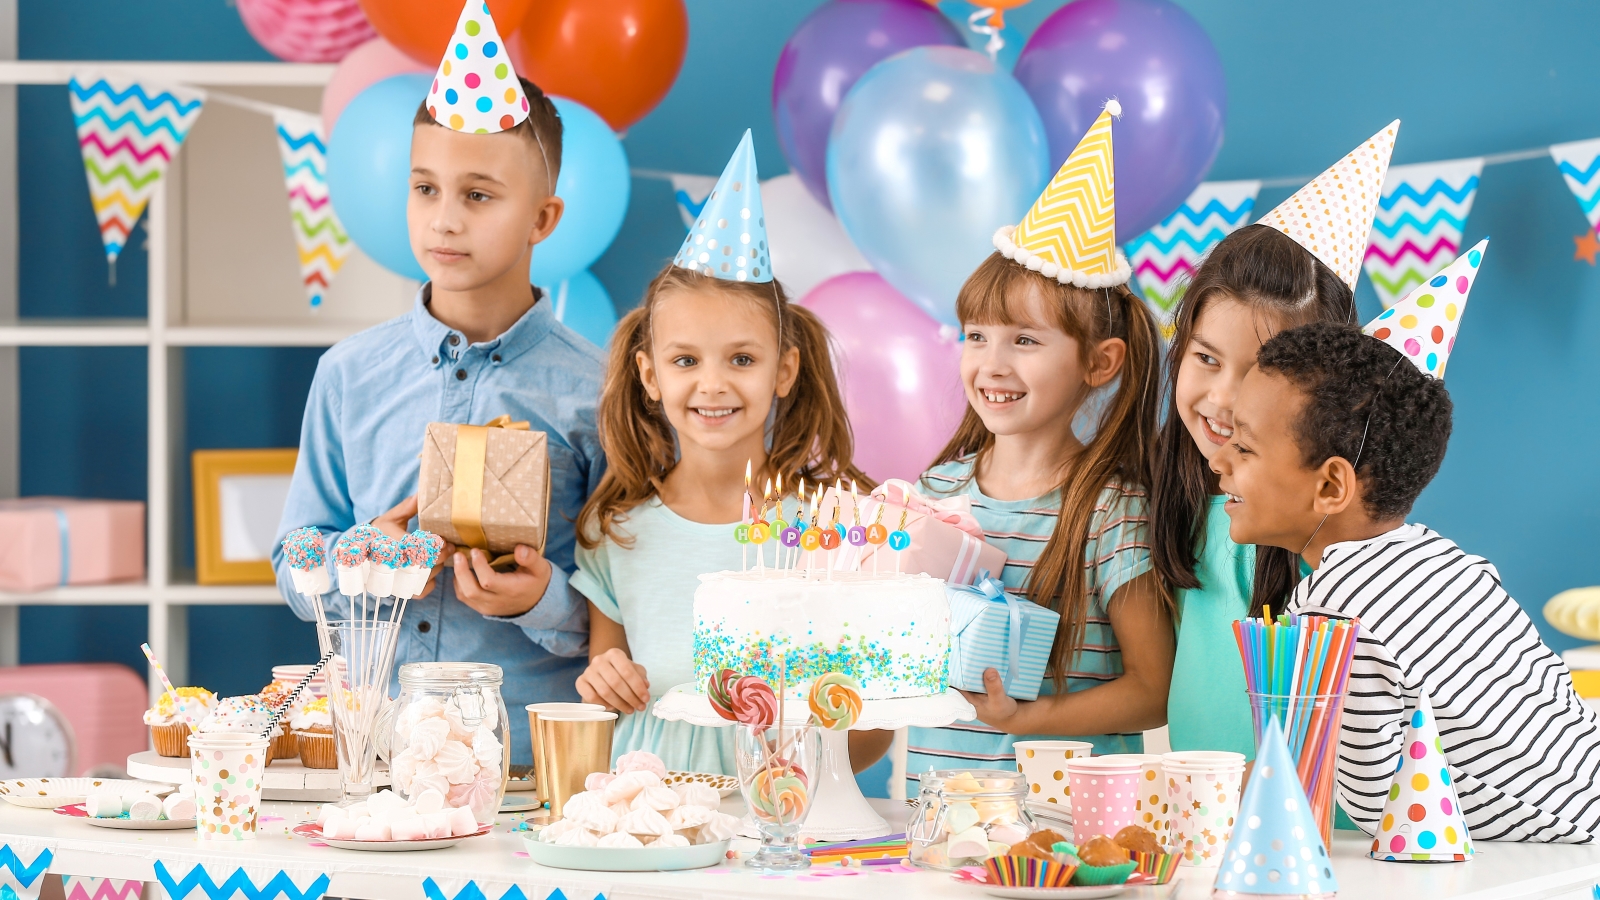 Creating A Kid's Birthday Party On A Budget